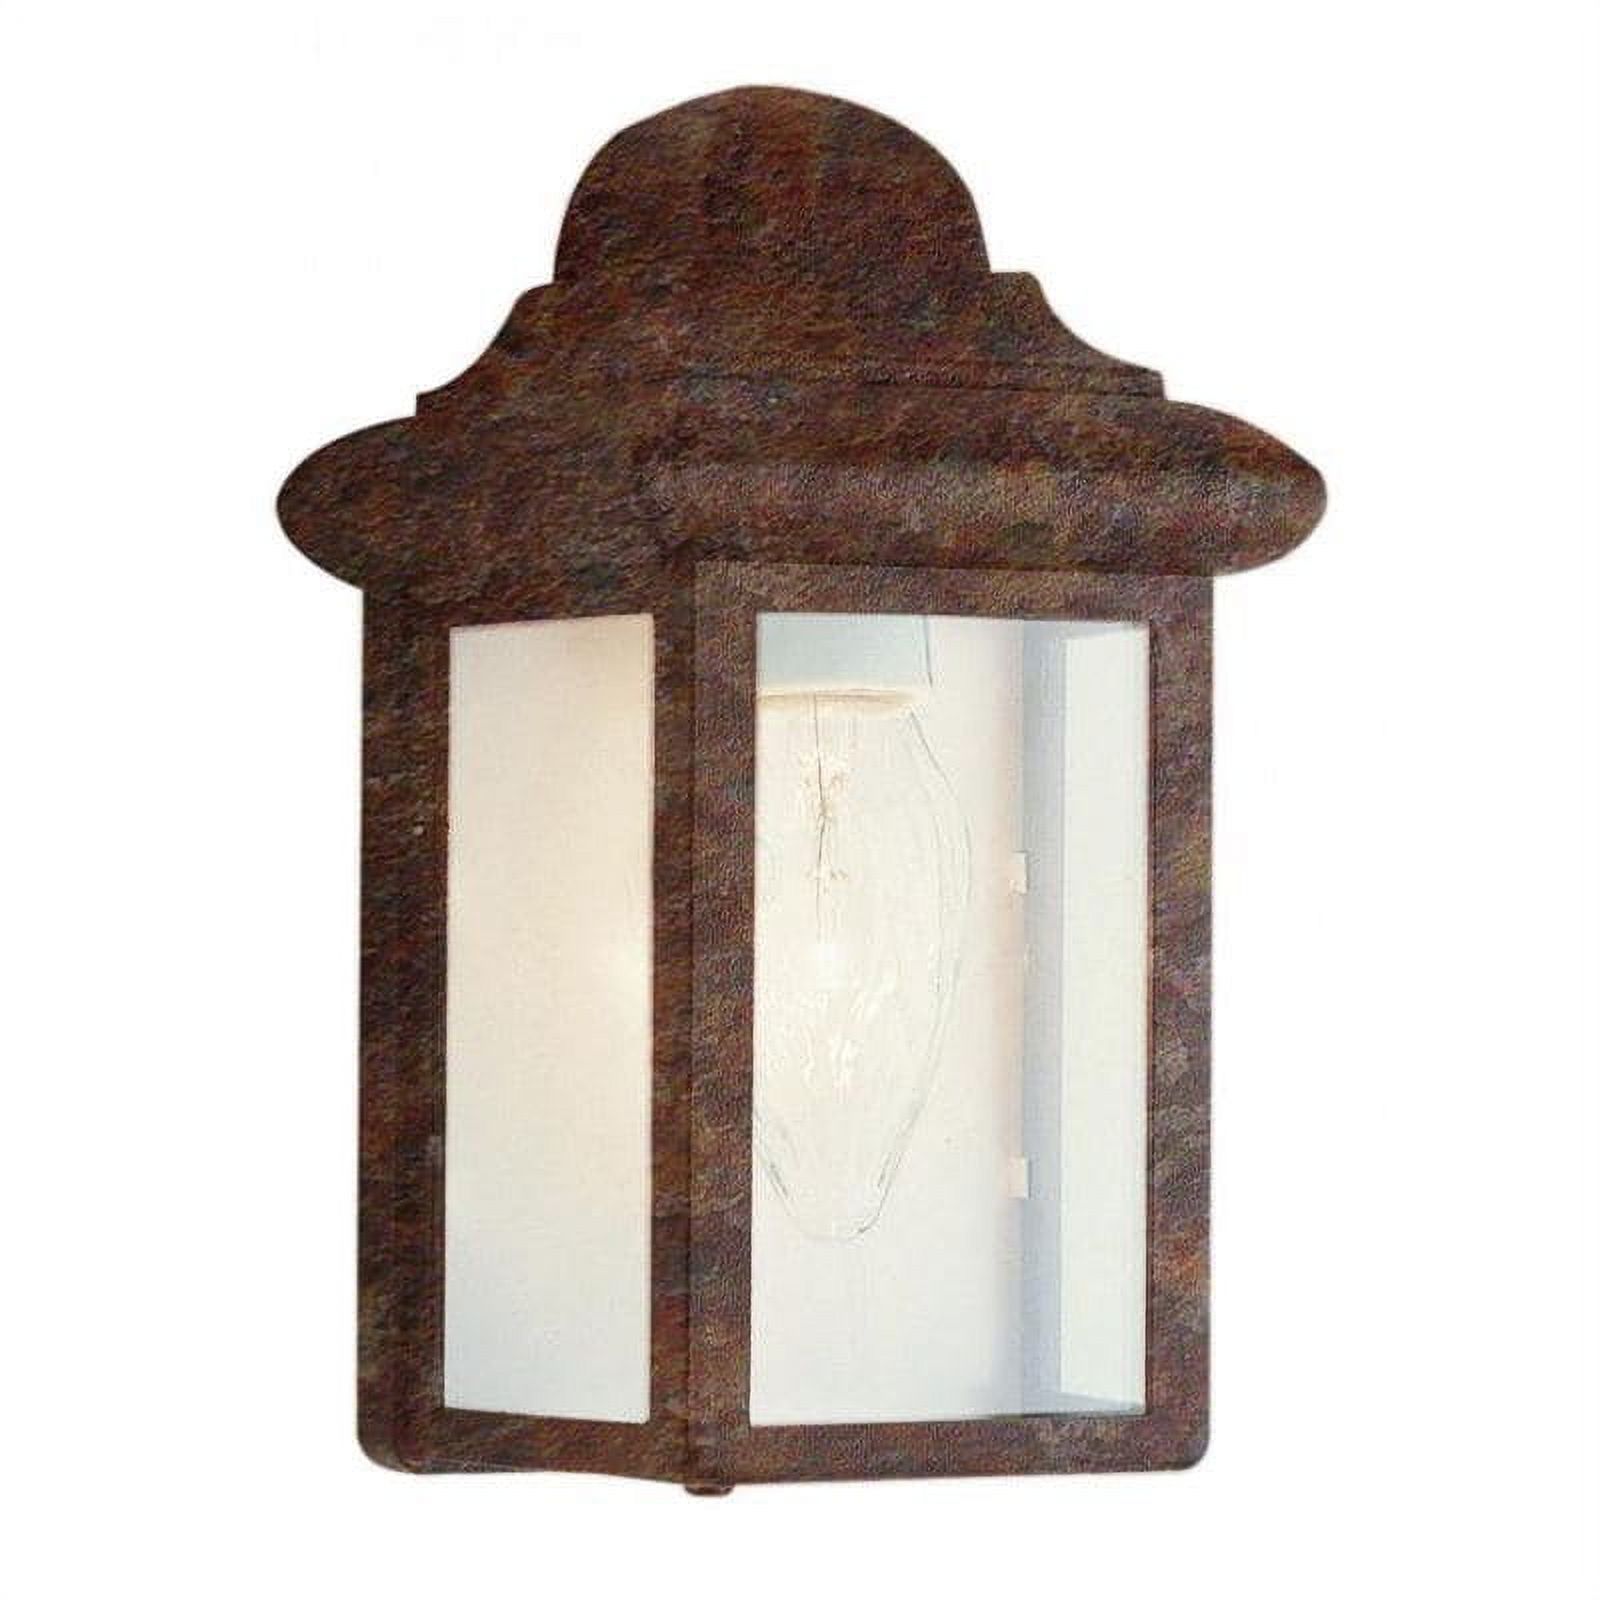 Trans Globe Lighting 44835 1 Light Down Lighting Outdoor Mini Wall Washer From The Outdoor - image 2 of 2